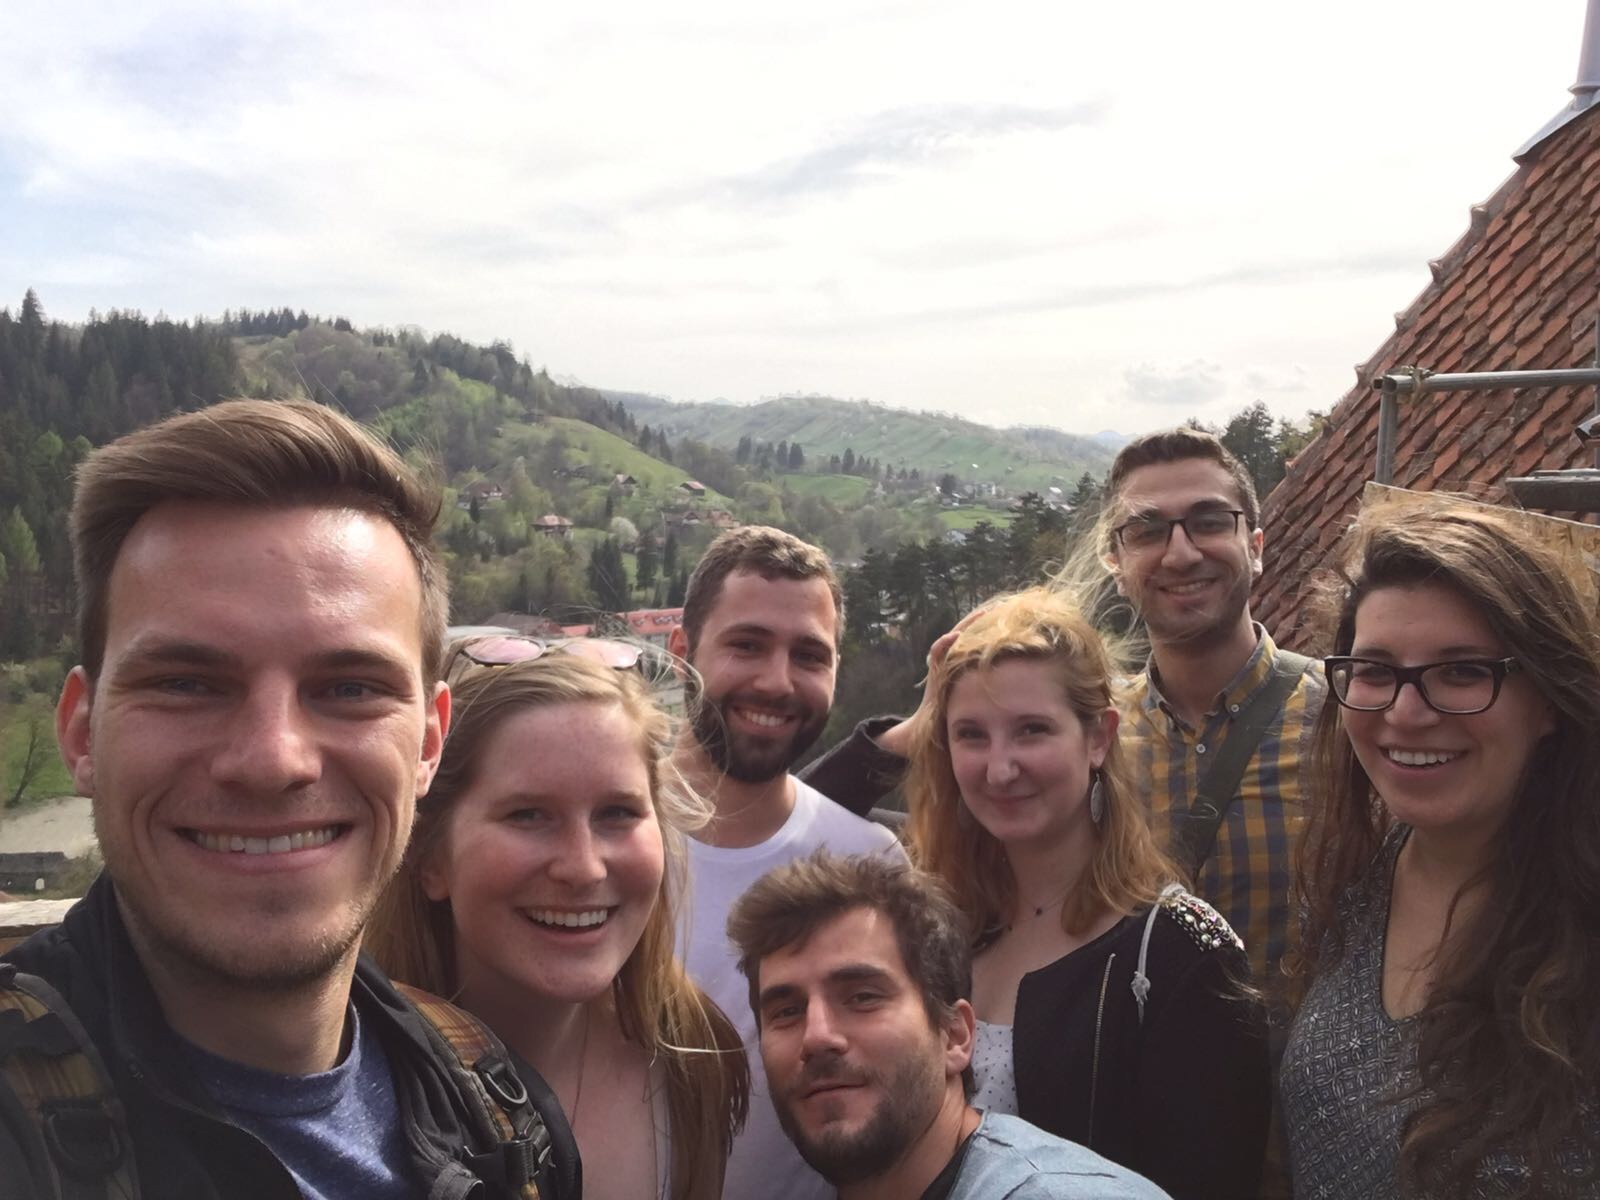 The organizers enjoying Dracula's Castle at the end of the field trip